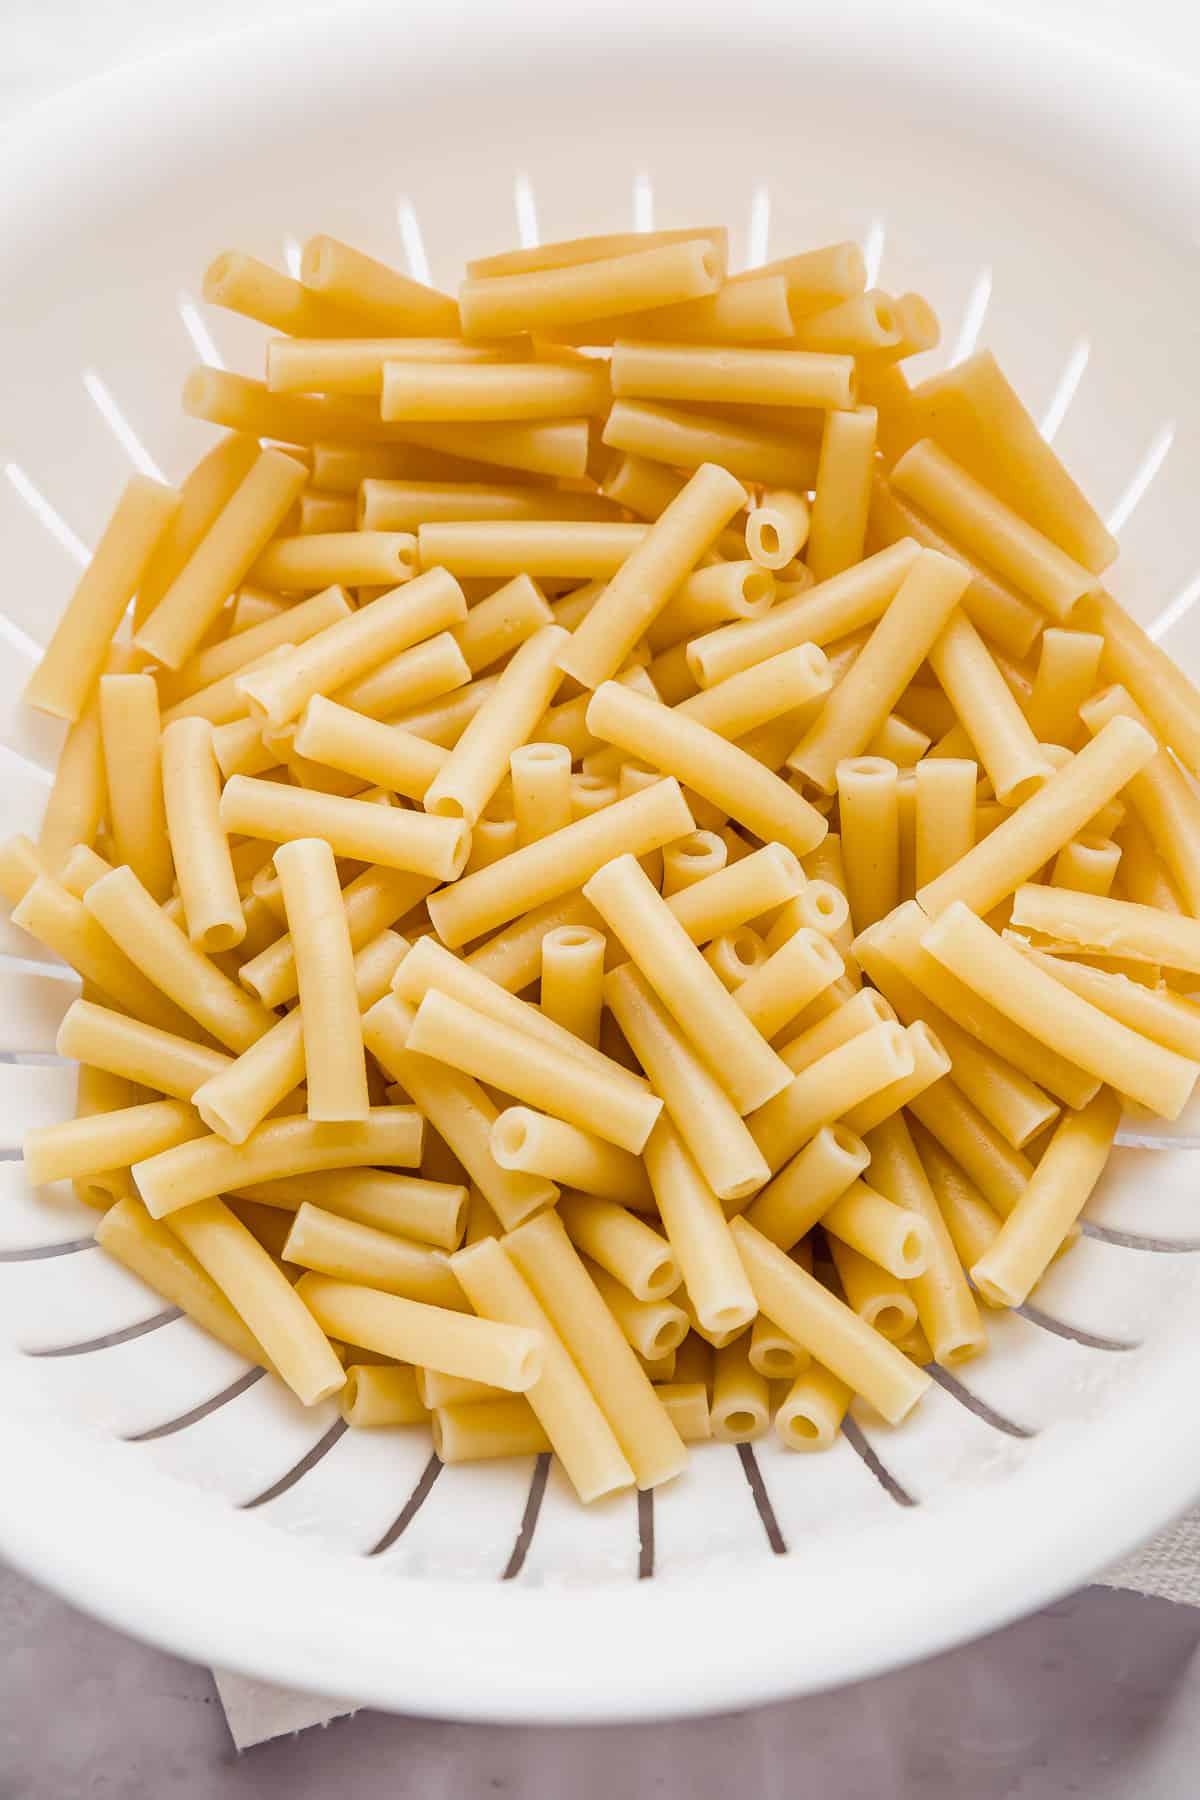 Cooked ziti pasta noodles in a white colander.